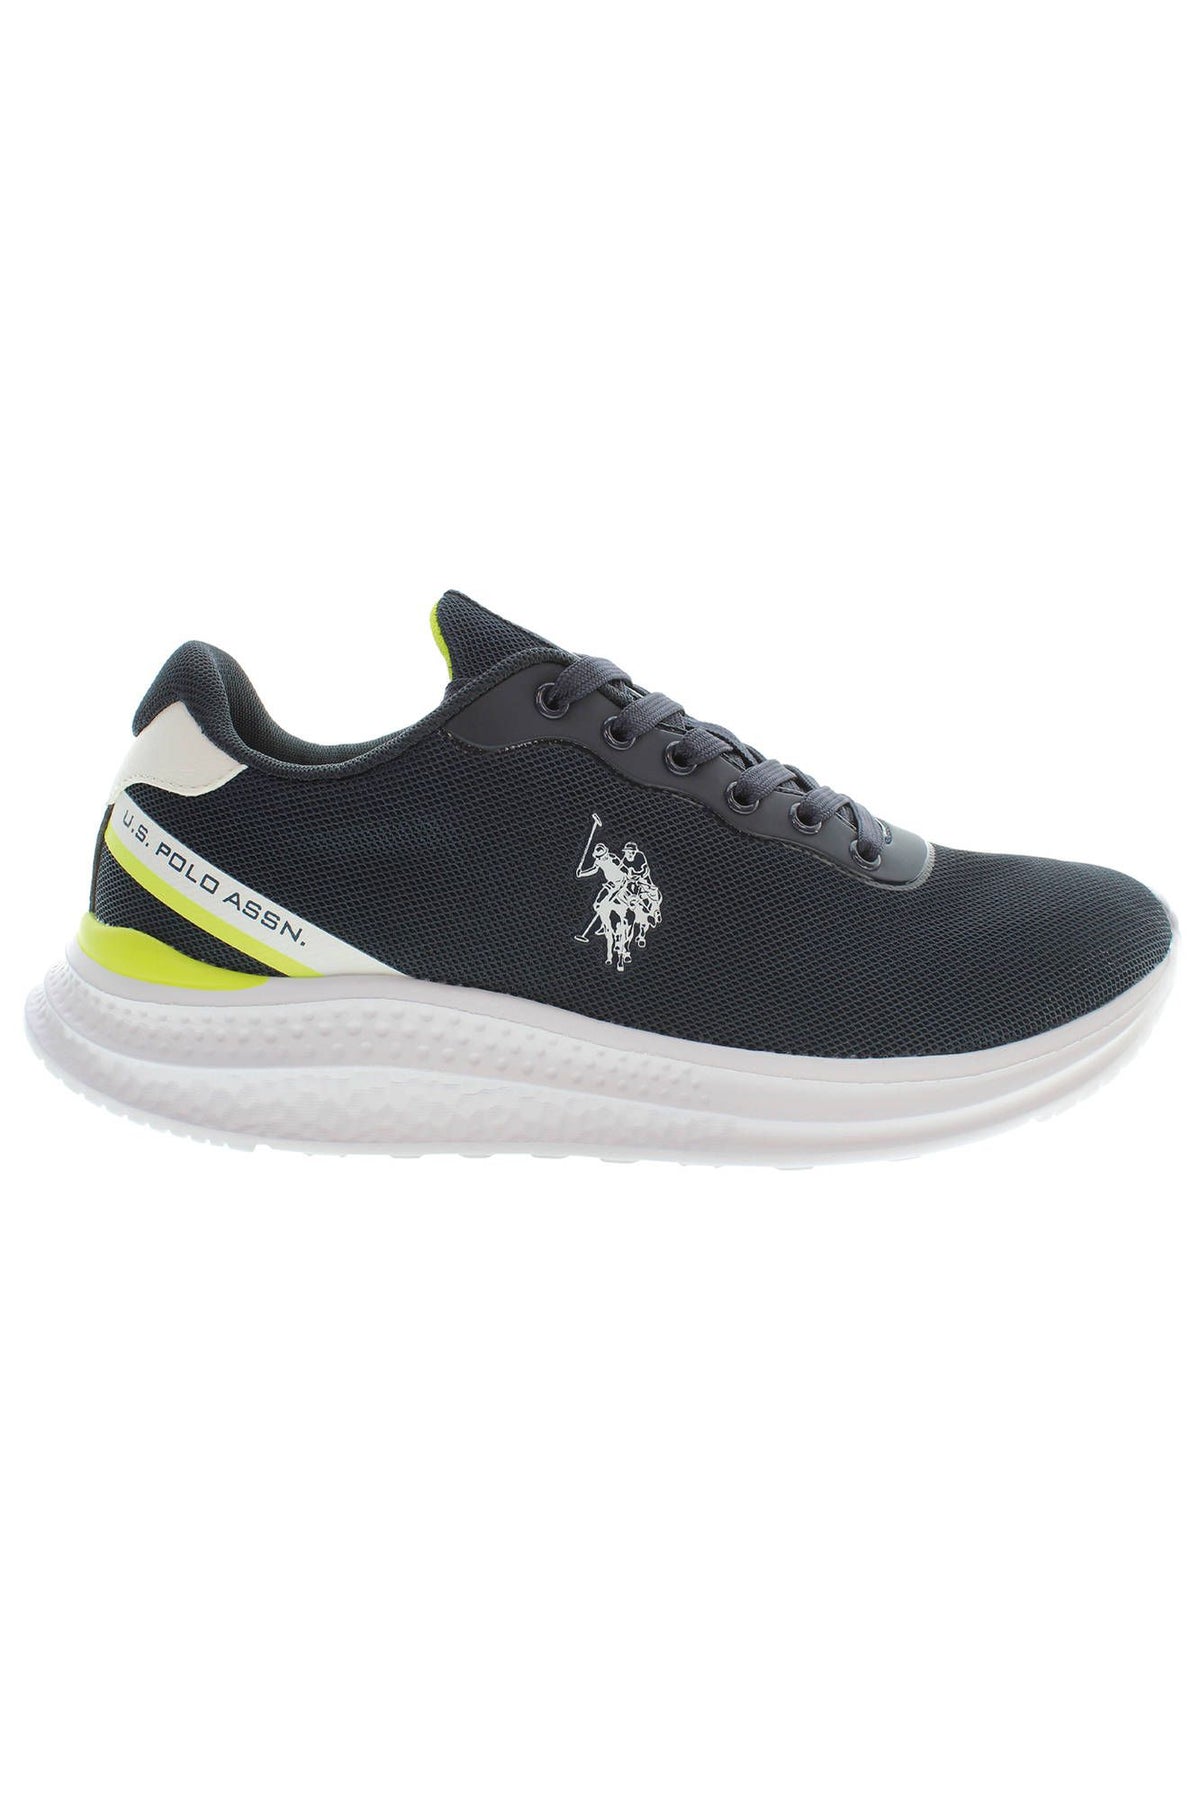 U.S. POLO ASSN. Elevated Blue Sneakers with Logo Detail